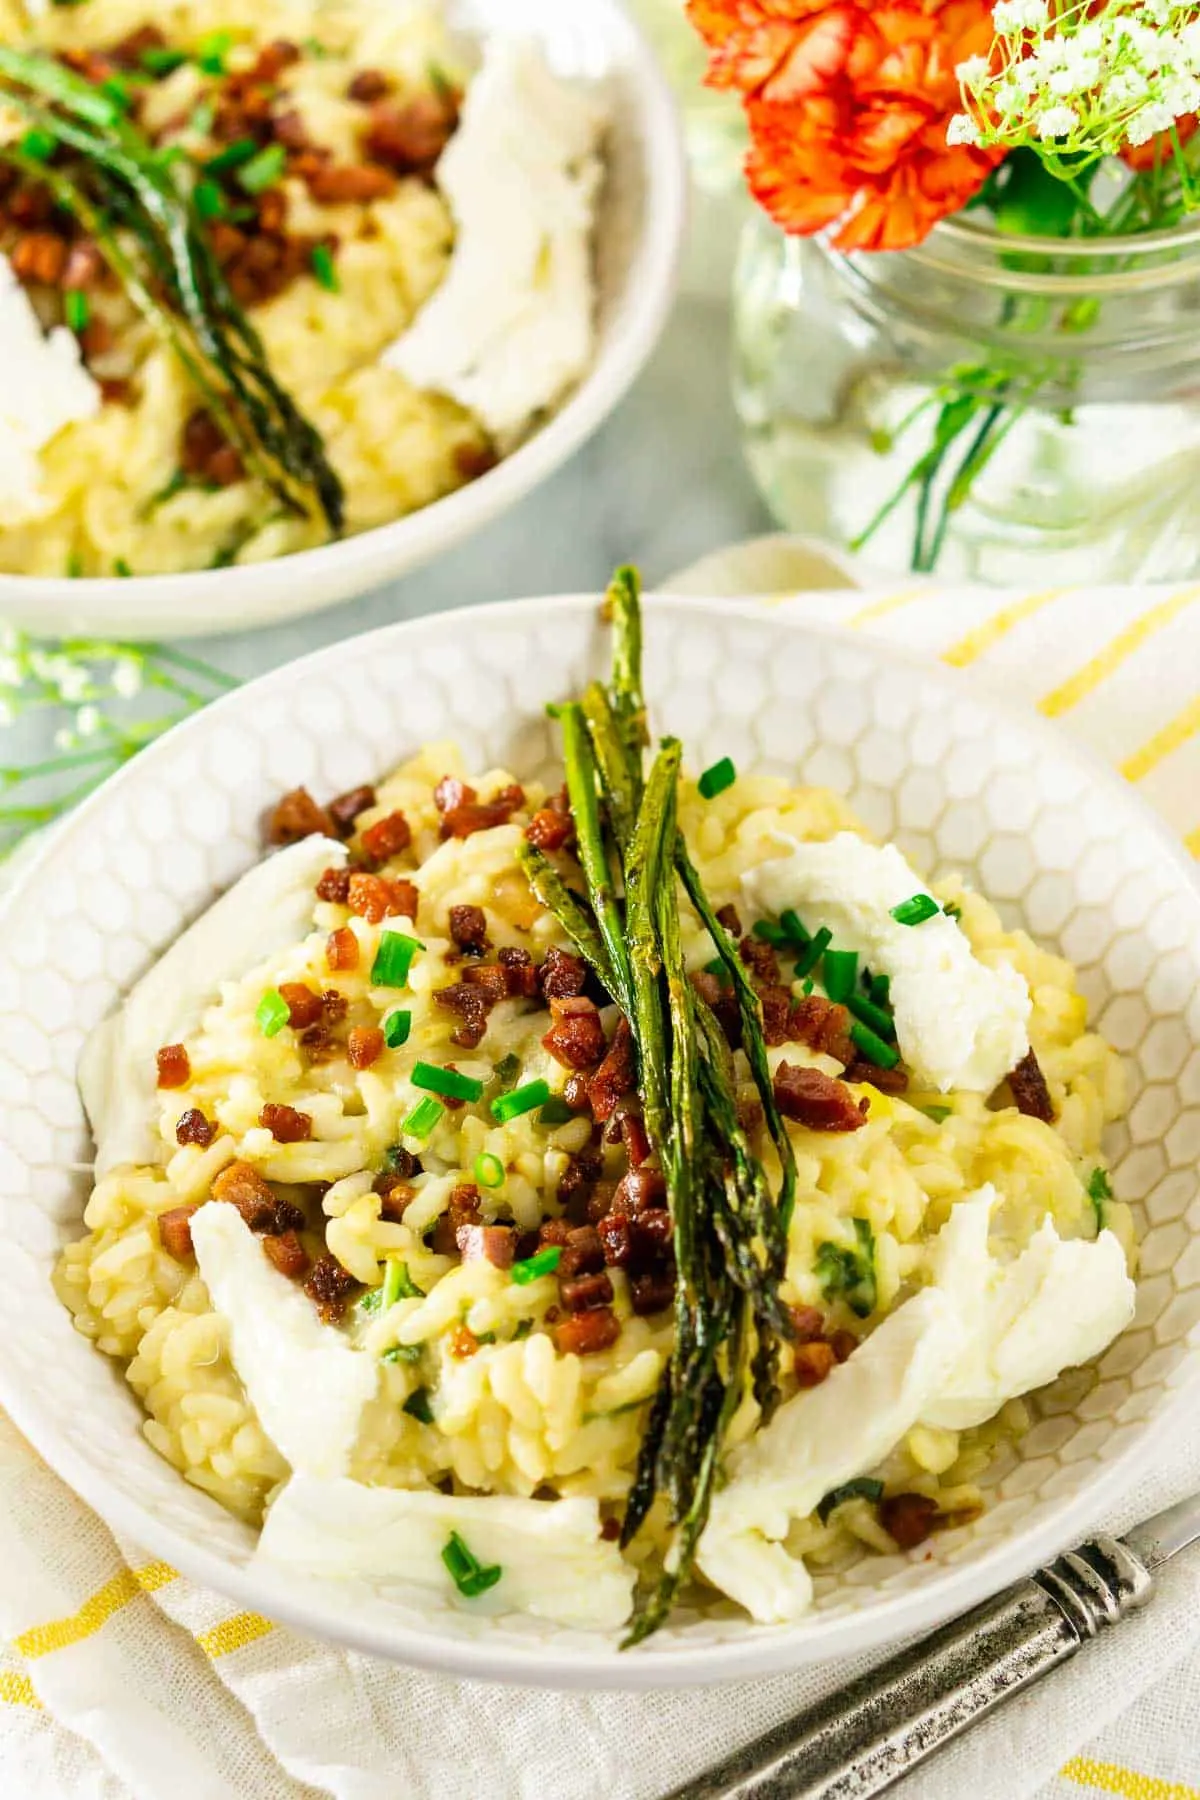 Risotto with asparagus